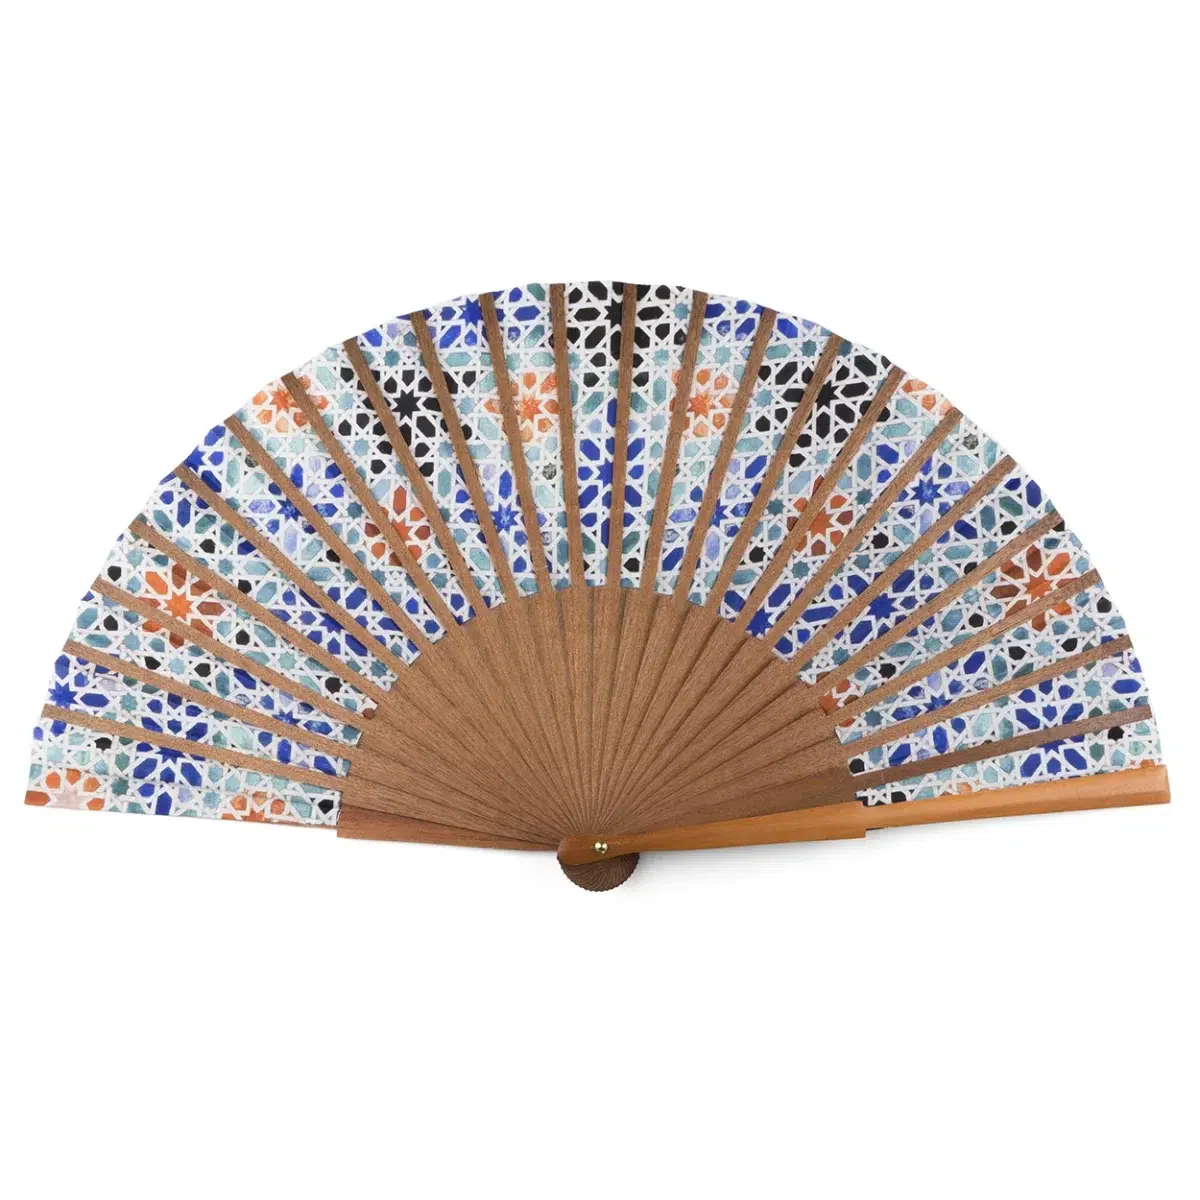 Multicolored Silk Fan with a Print Inspired by the Tiles and Mosaics of Morocco.